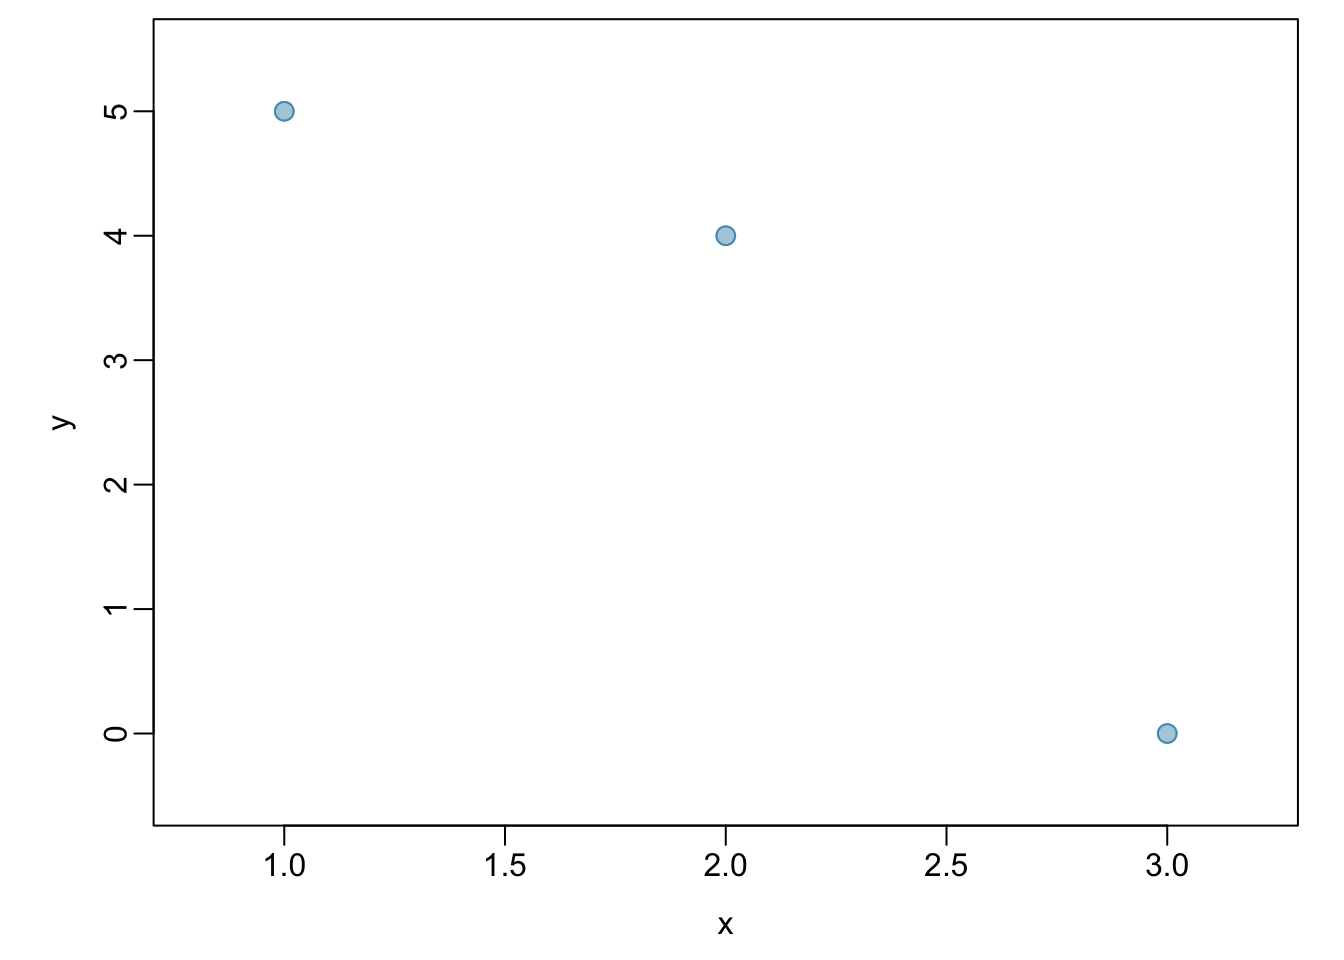 A scatterplot showing three points: (1, 5), (2, 4), and (3, 0)